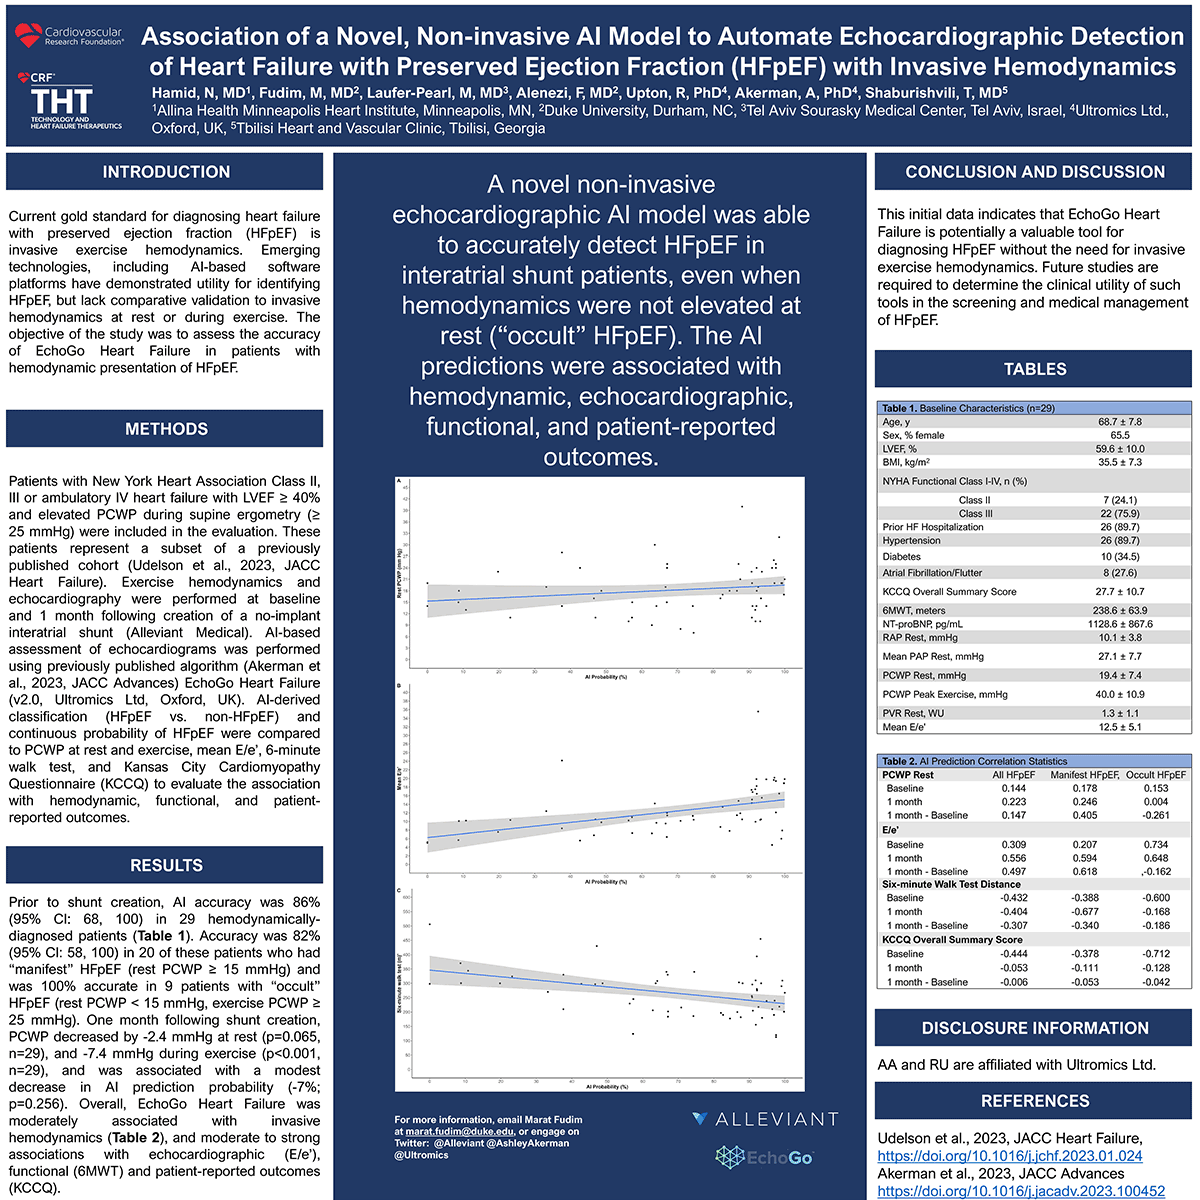 A recent study by @NadiraHamind demonstrated EchoGo®'s ability to diagnose HFpEF without invasive exercise hemodynamics and how our platform could detect HFpEF in interatrial shunt patients even in the absence of elevated hemodynamics. #ACC24 #CardioTwitter